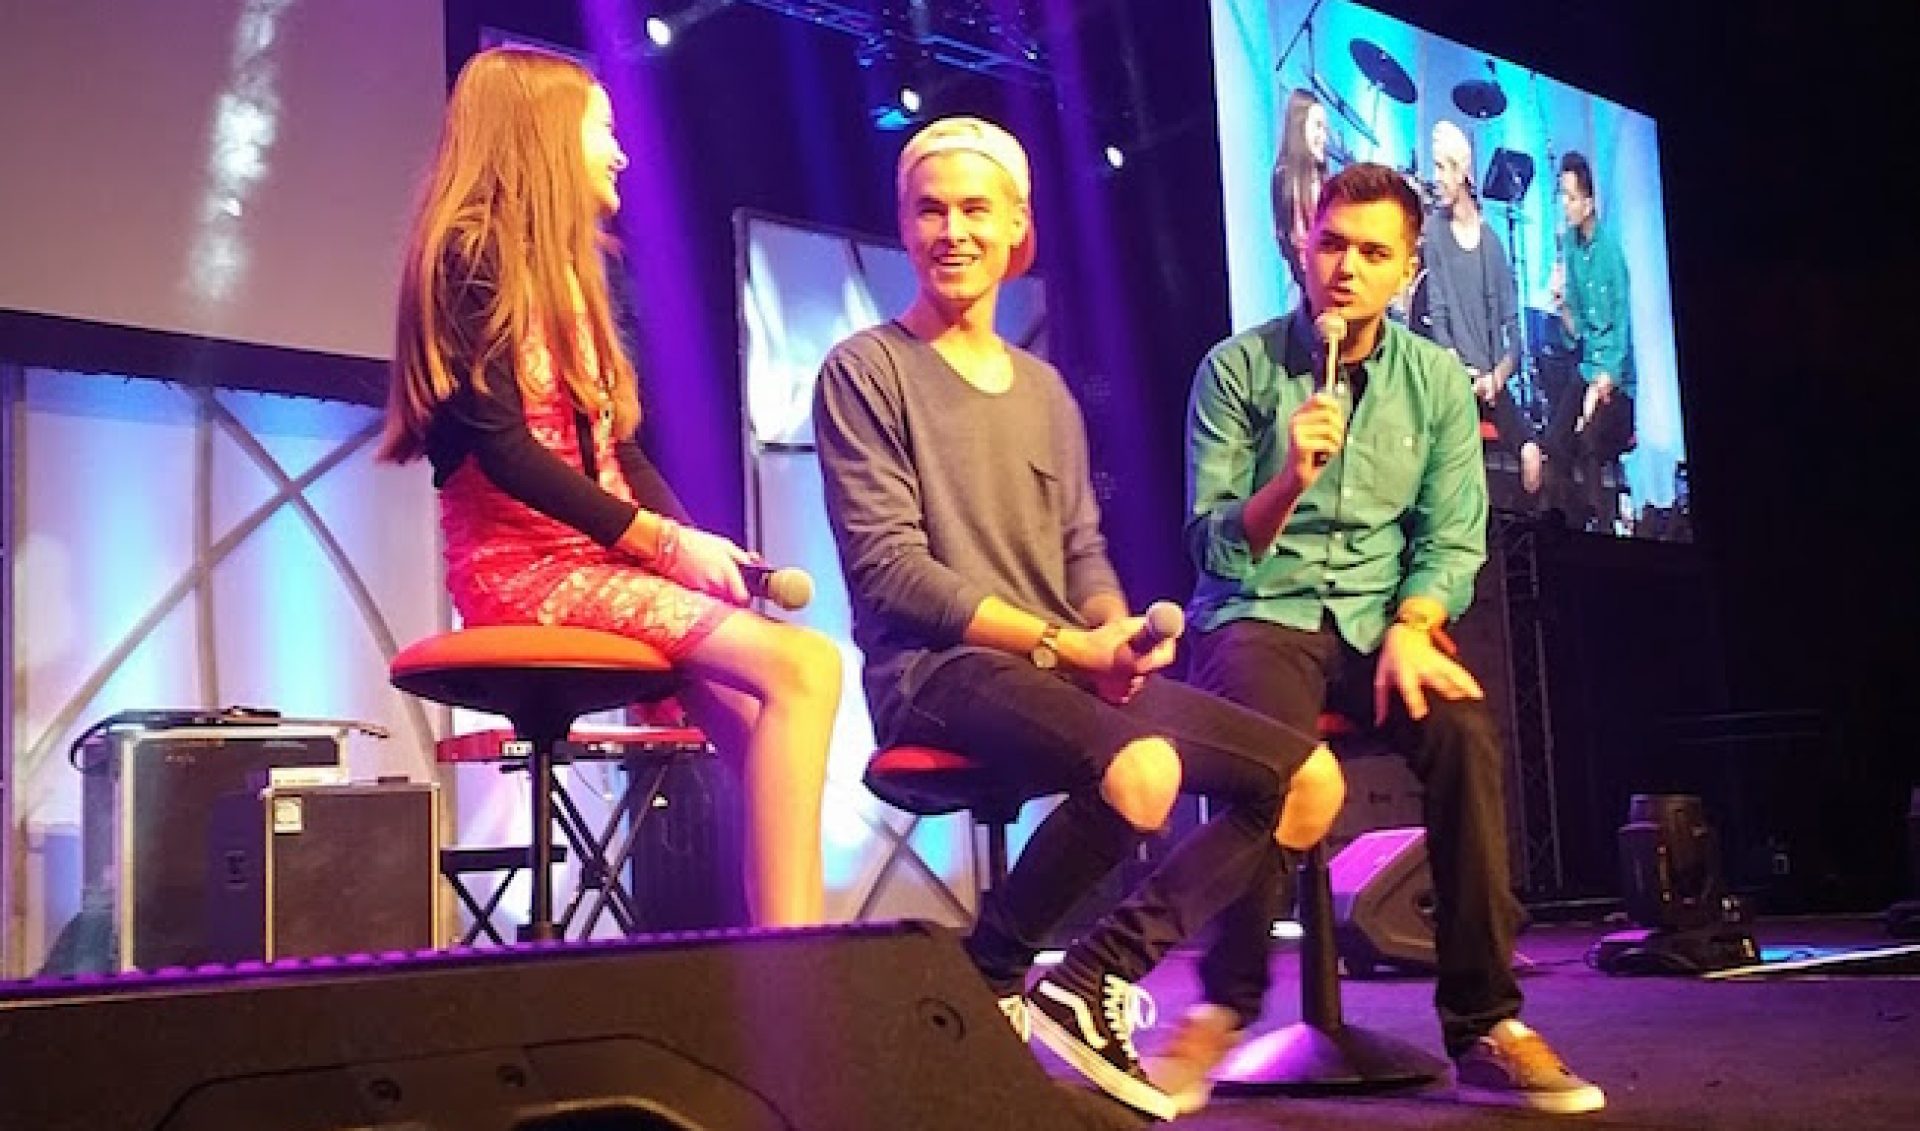 YouTube Star Kian Lawley Premieres Trailer For ‘The Chosen’ Movie At Playlist Live